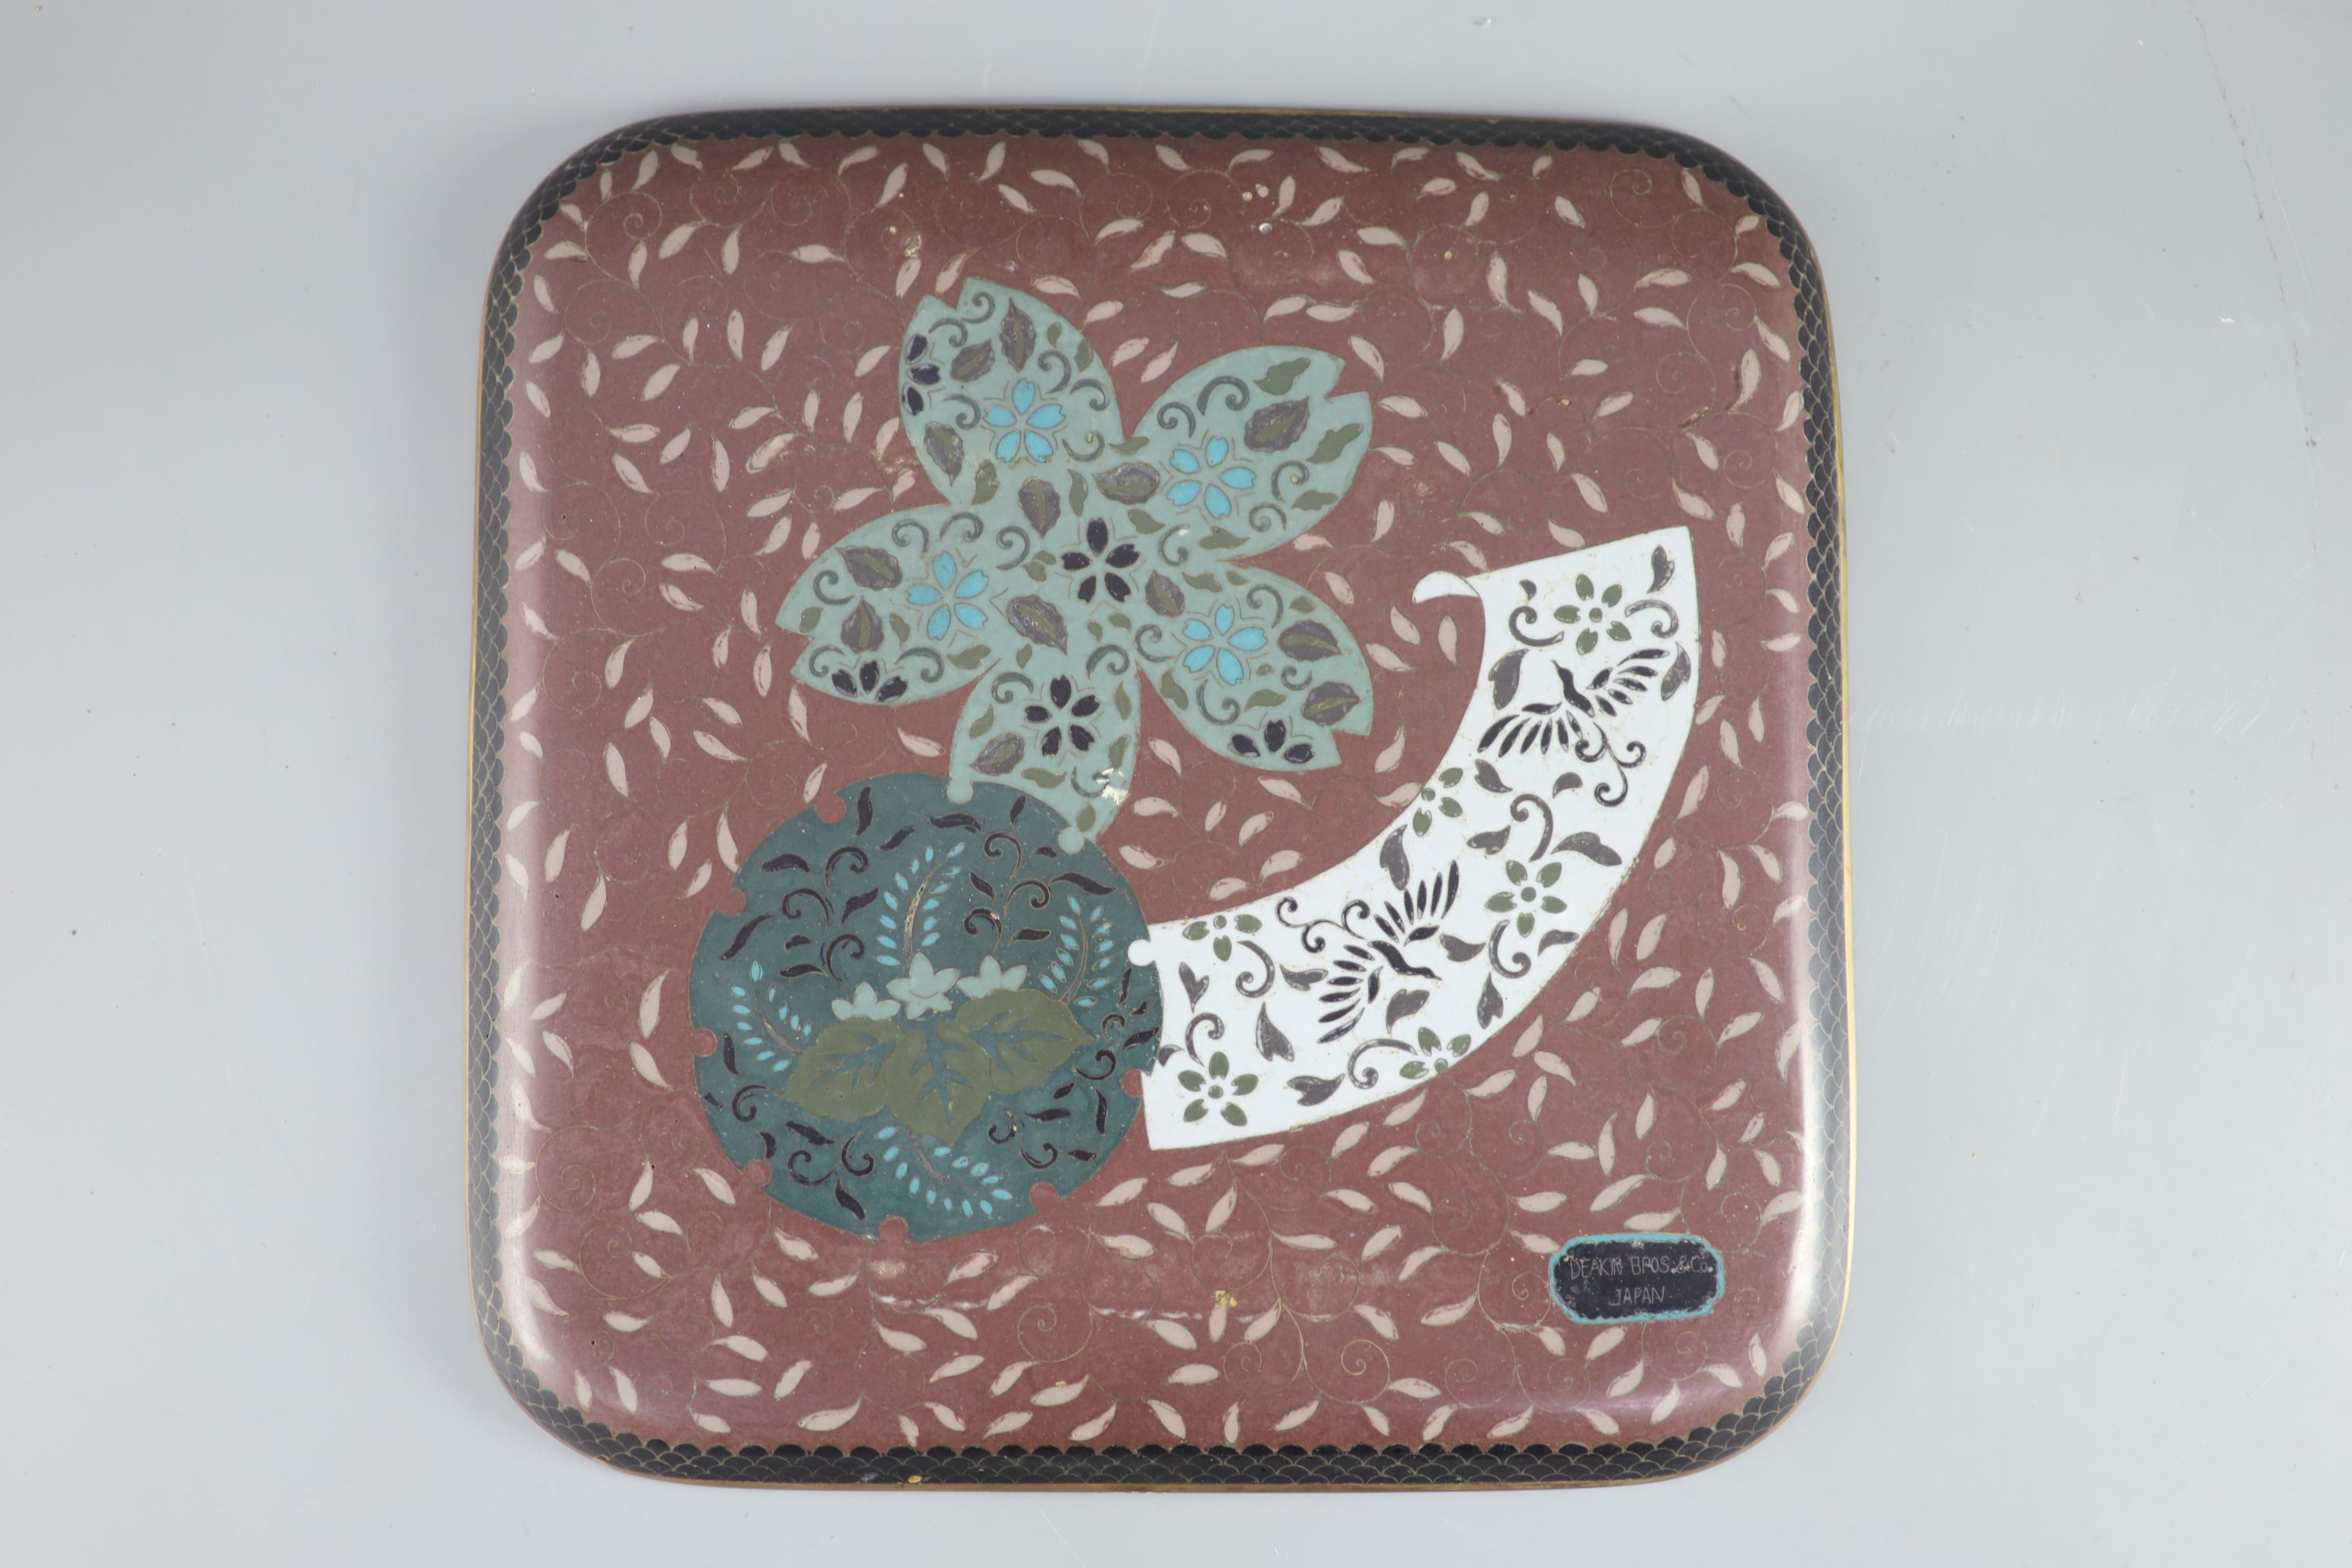 A Japanese square silver wire cloisonné enamel tray, Meiji period, mark for Deakin Bros & Co., - Image 3 of 4